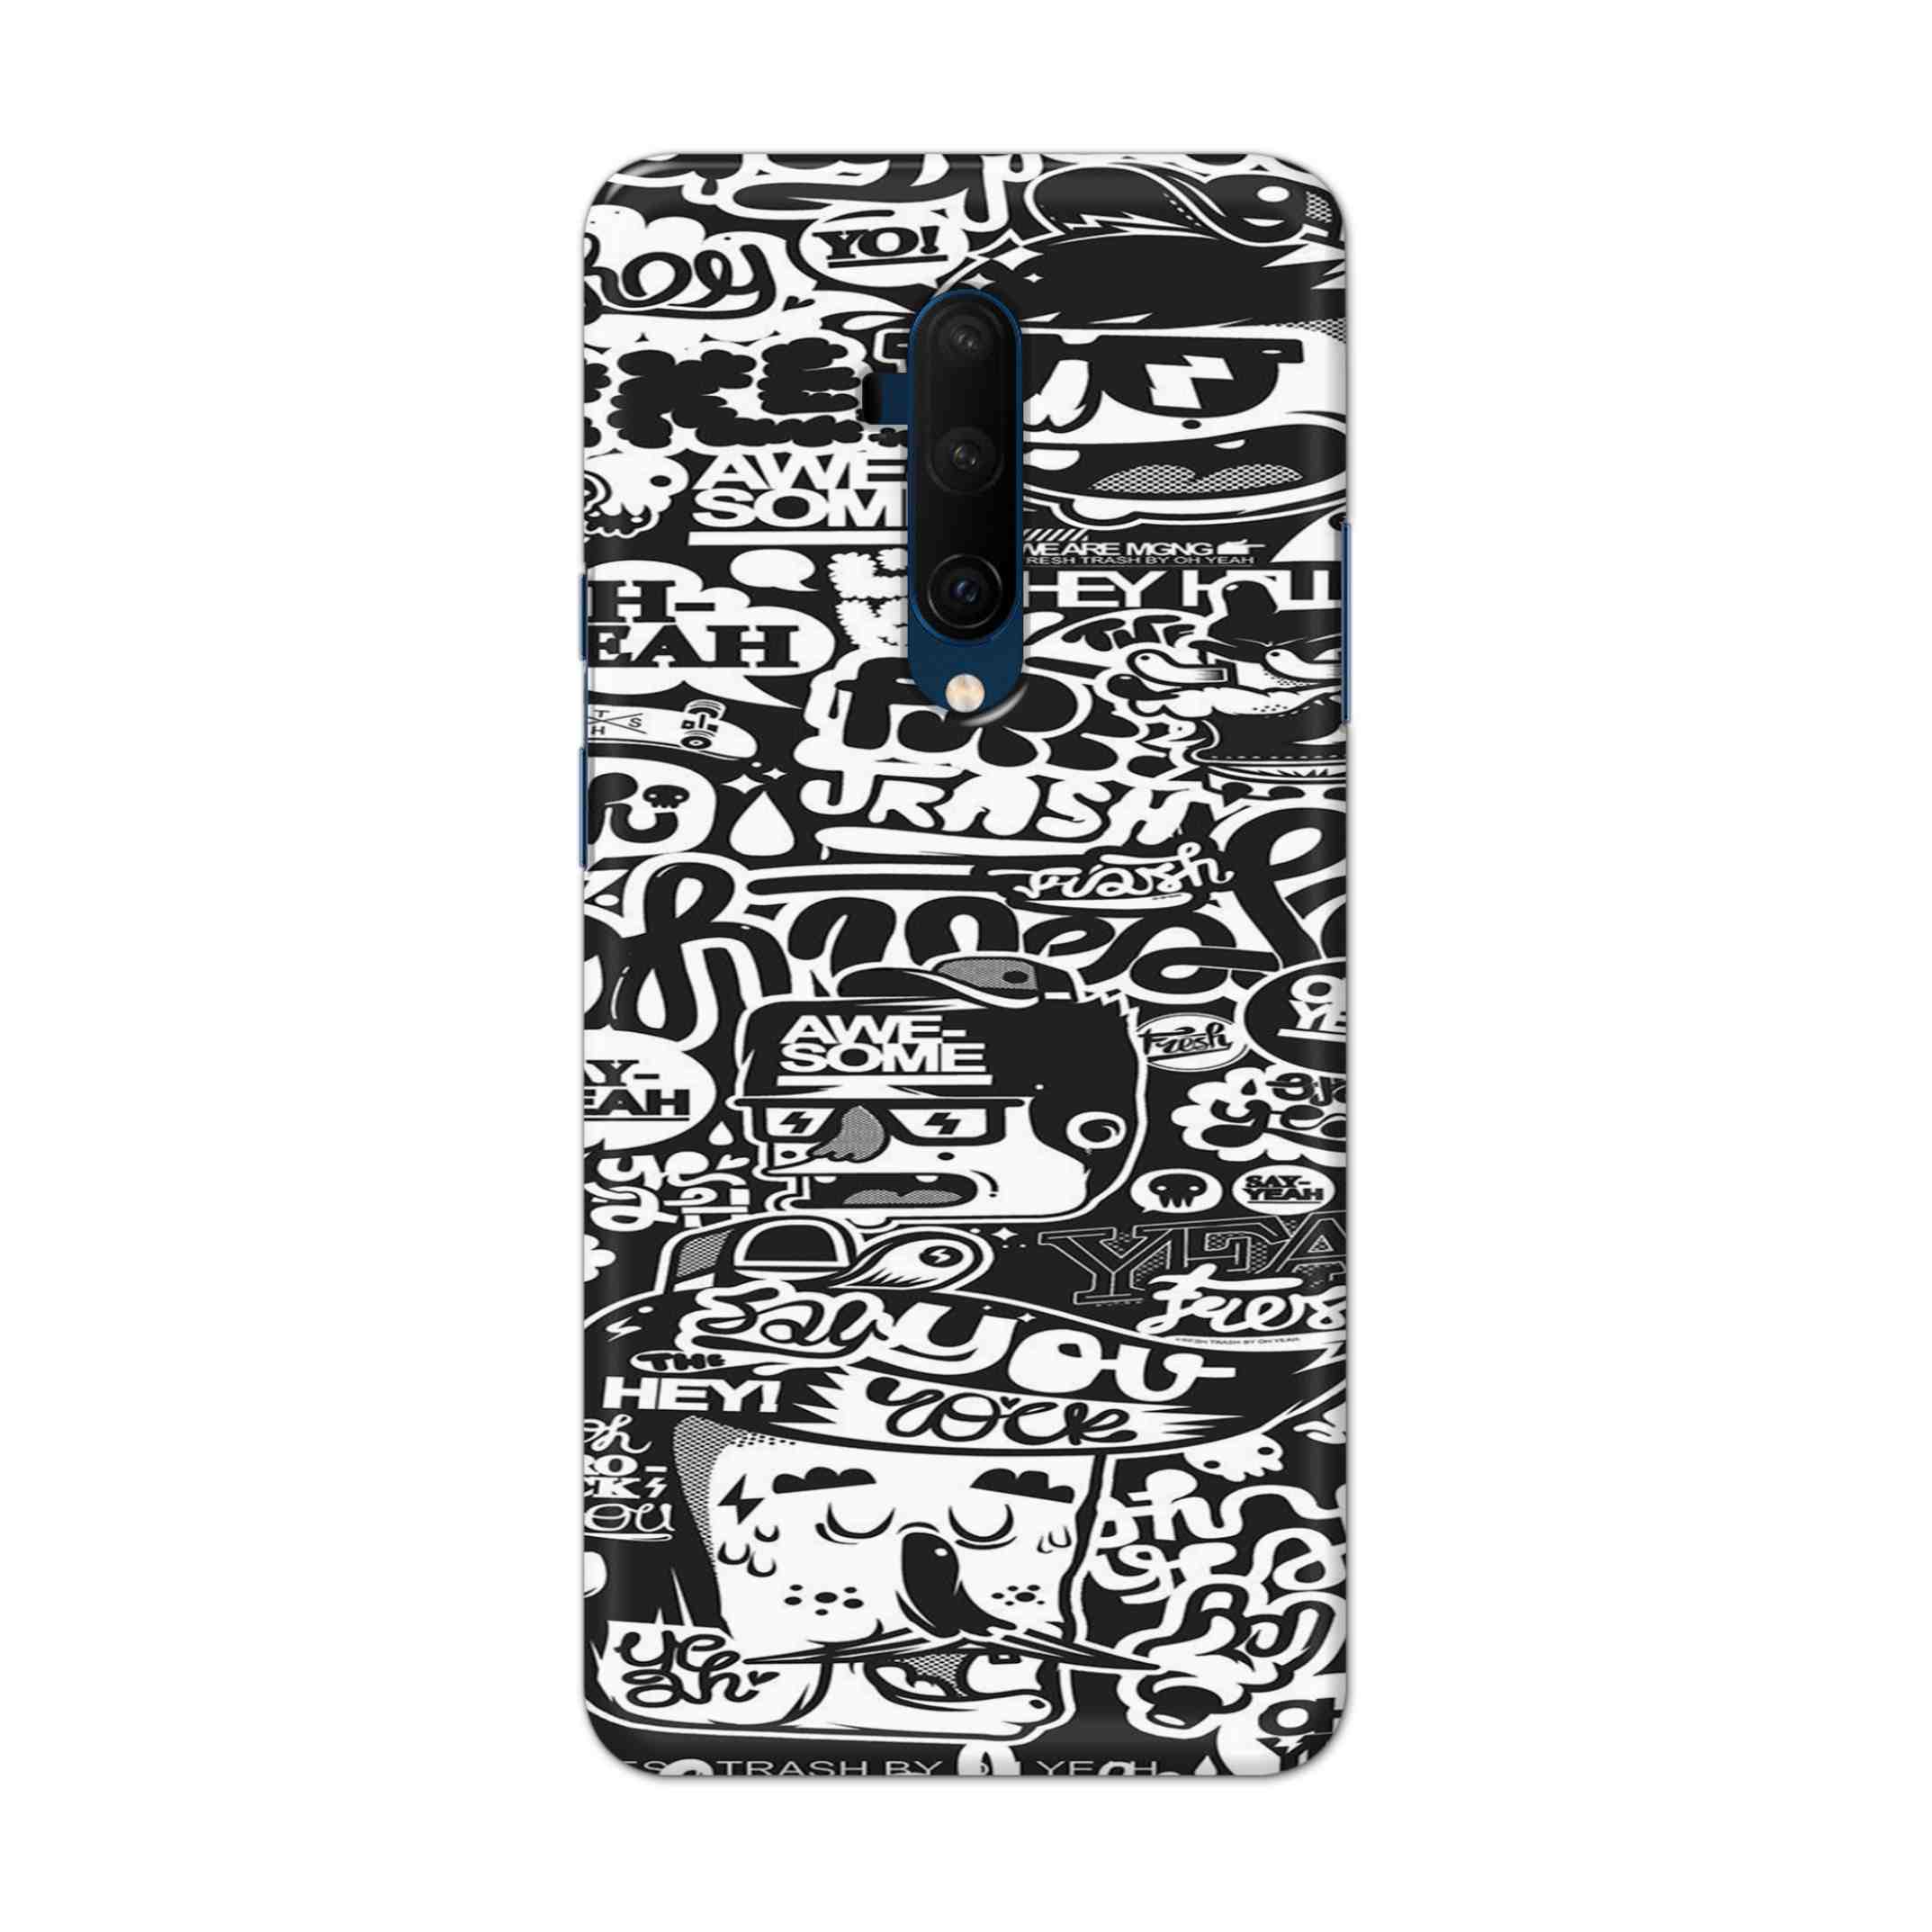 Buy Awesome Hard Back Mobile Phone Case Cover For OnePlus 7T Pro Online